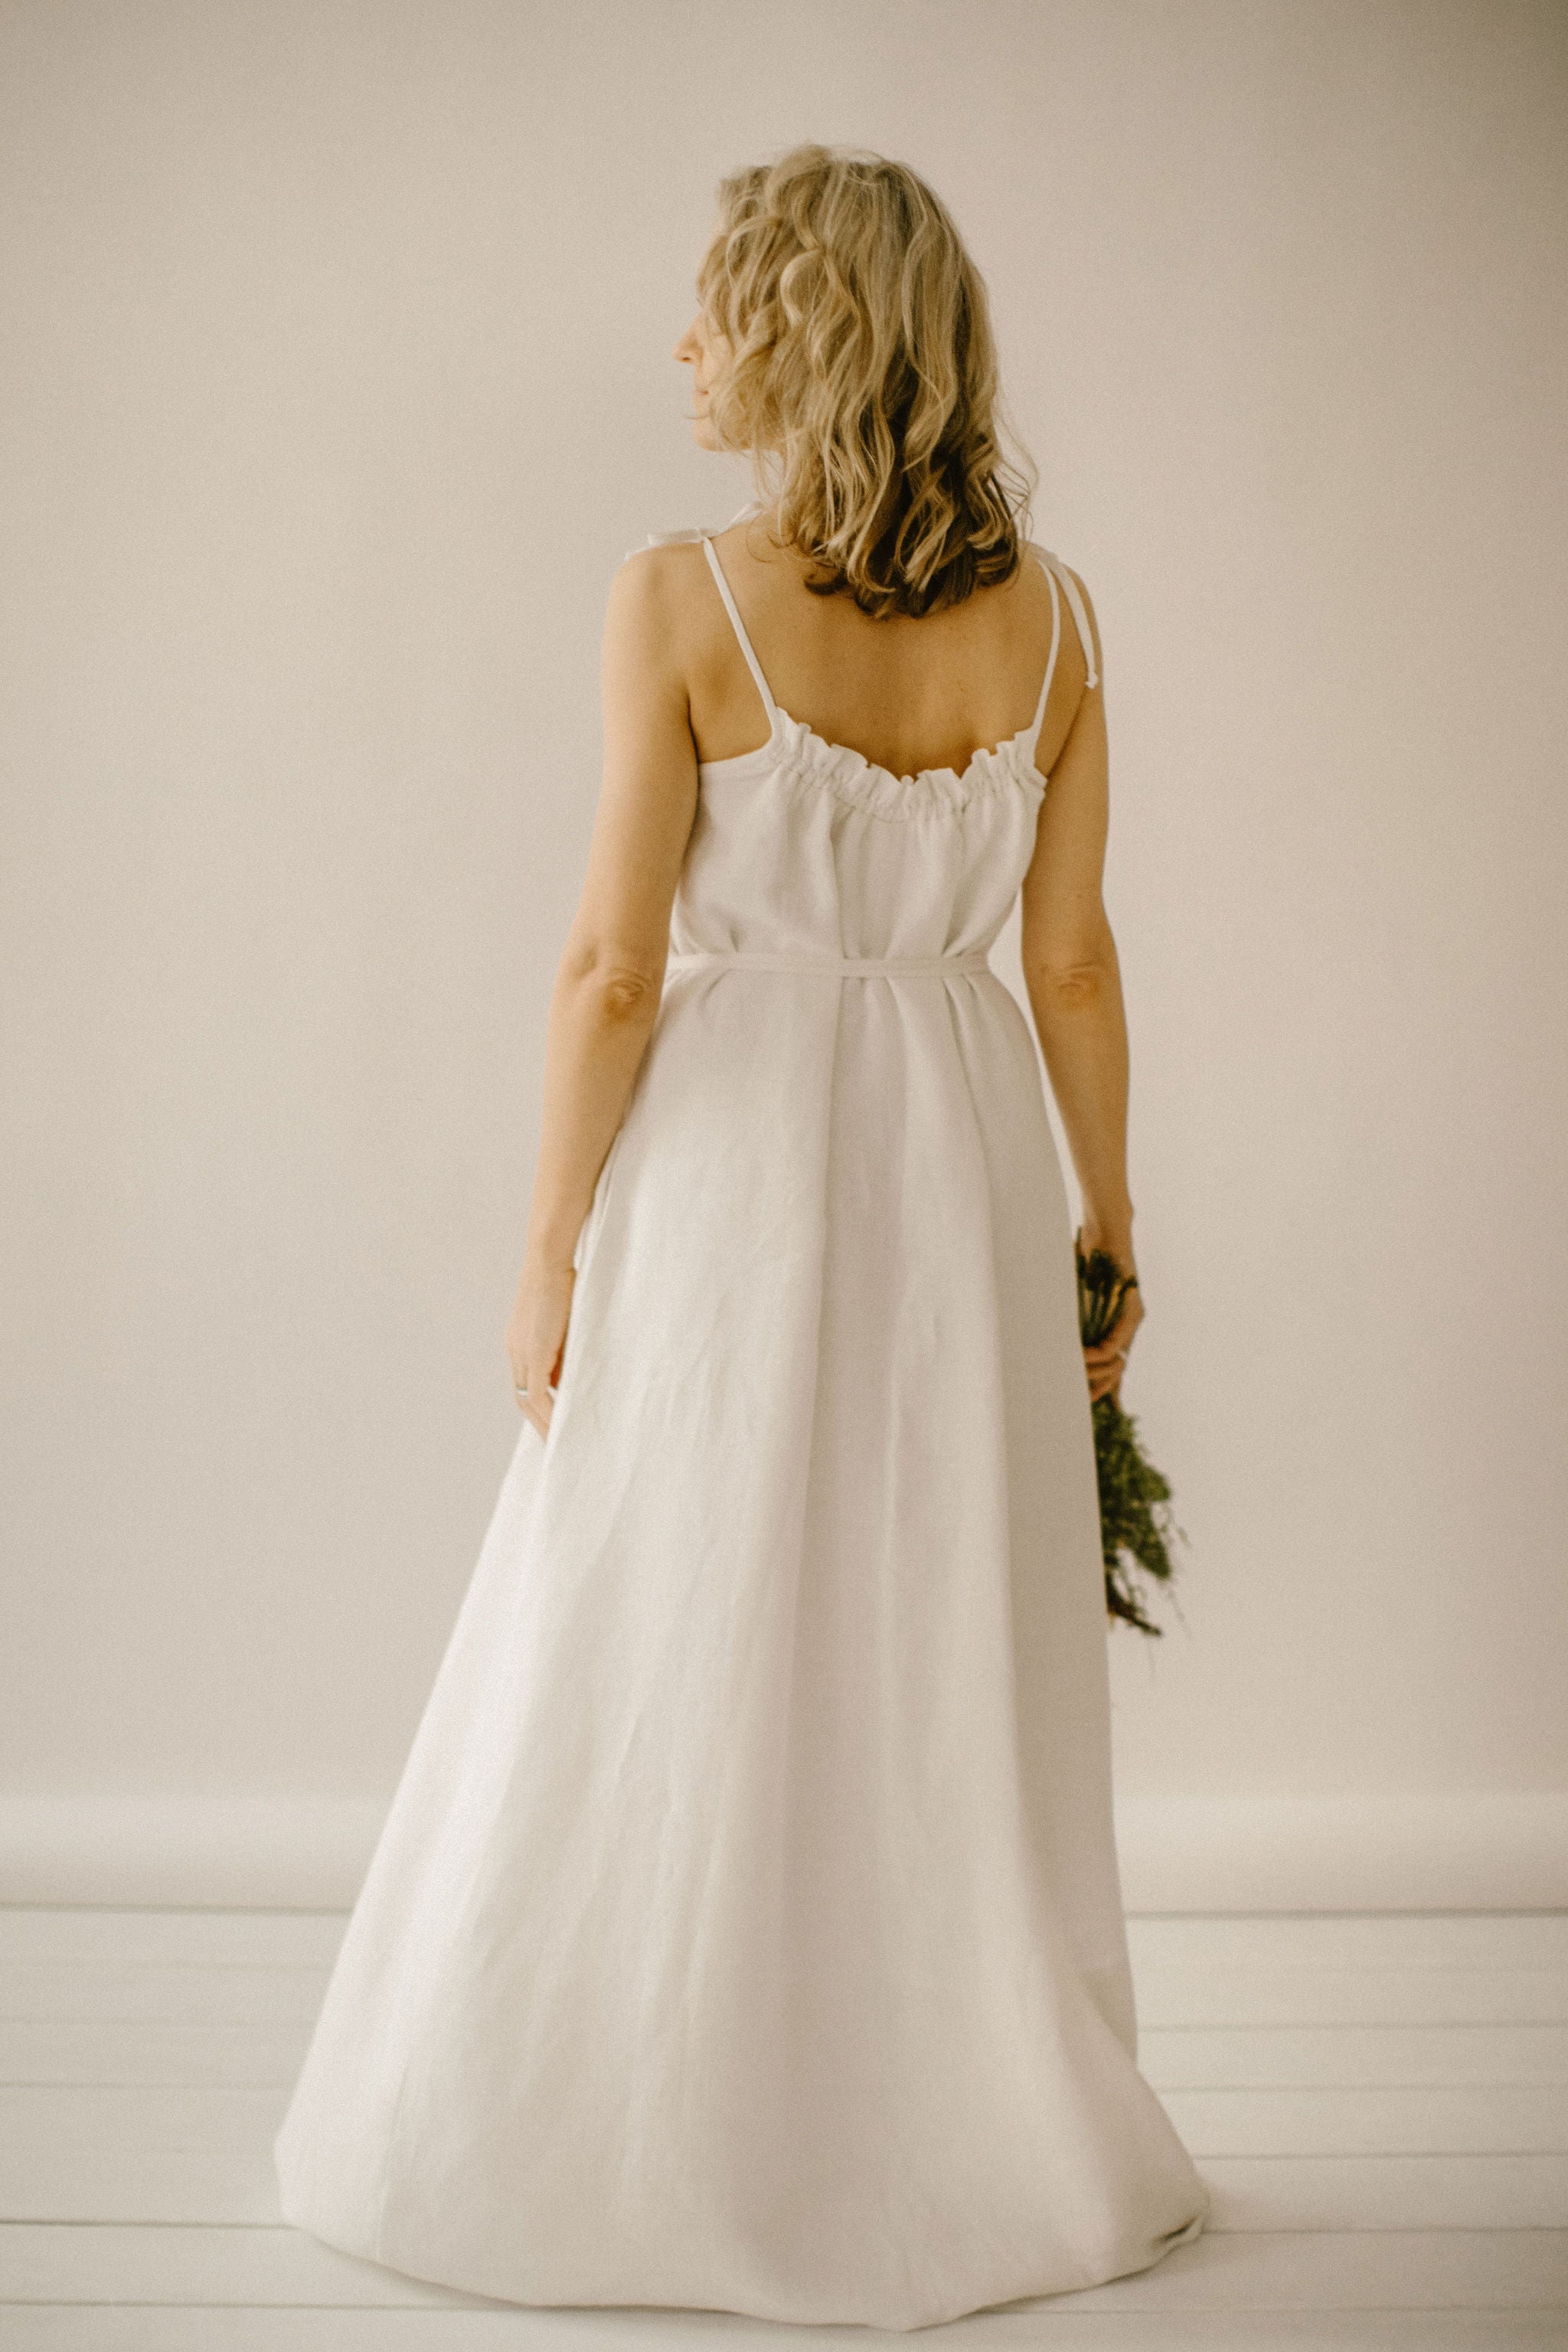 Linen Wedding Dress With Straps. Handcrafted. World Wide Shipping.